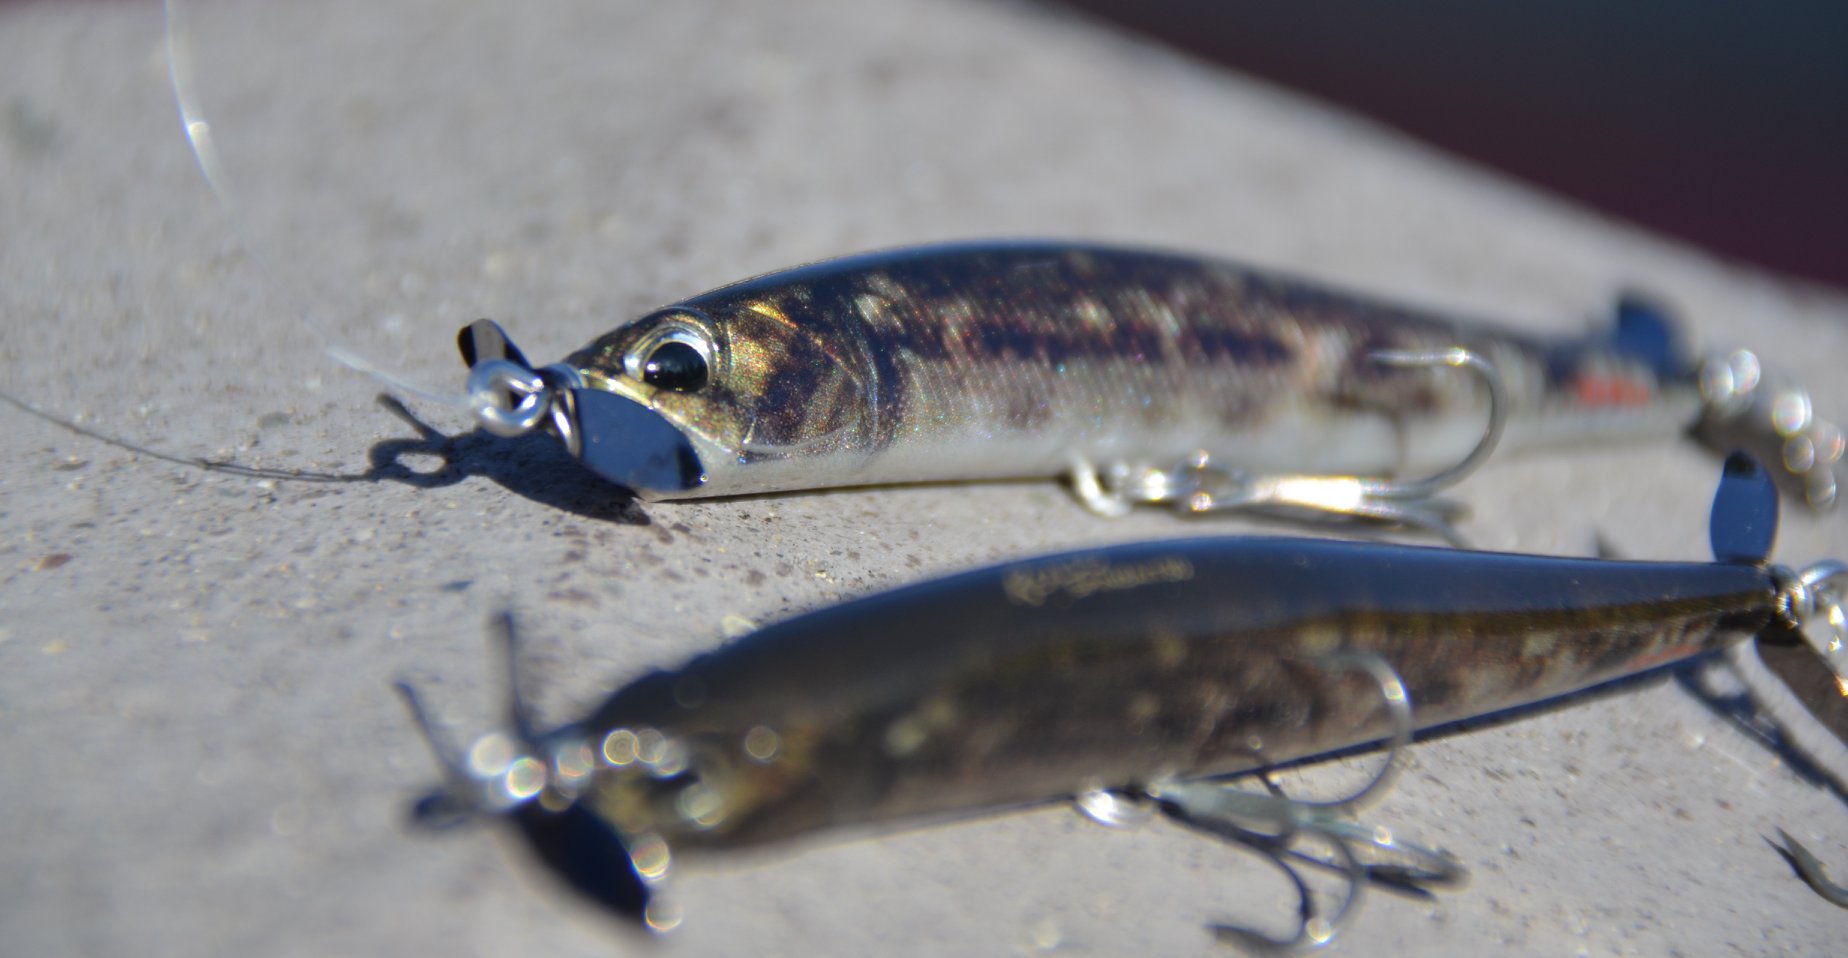 The spybait technique is an overlooked, but productive, option for March  fishing, Lifestyles